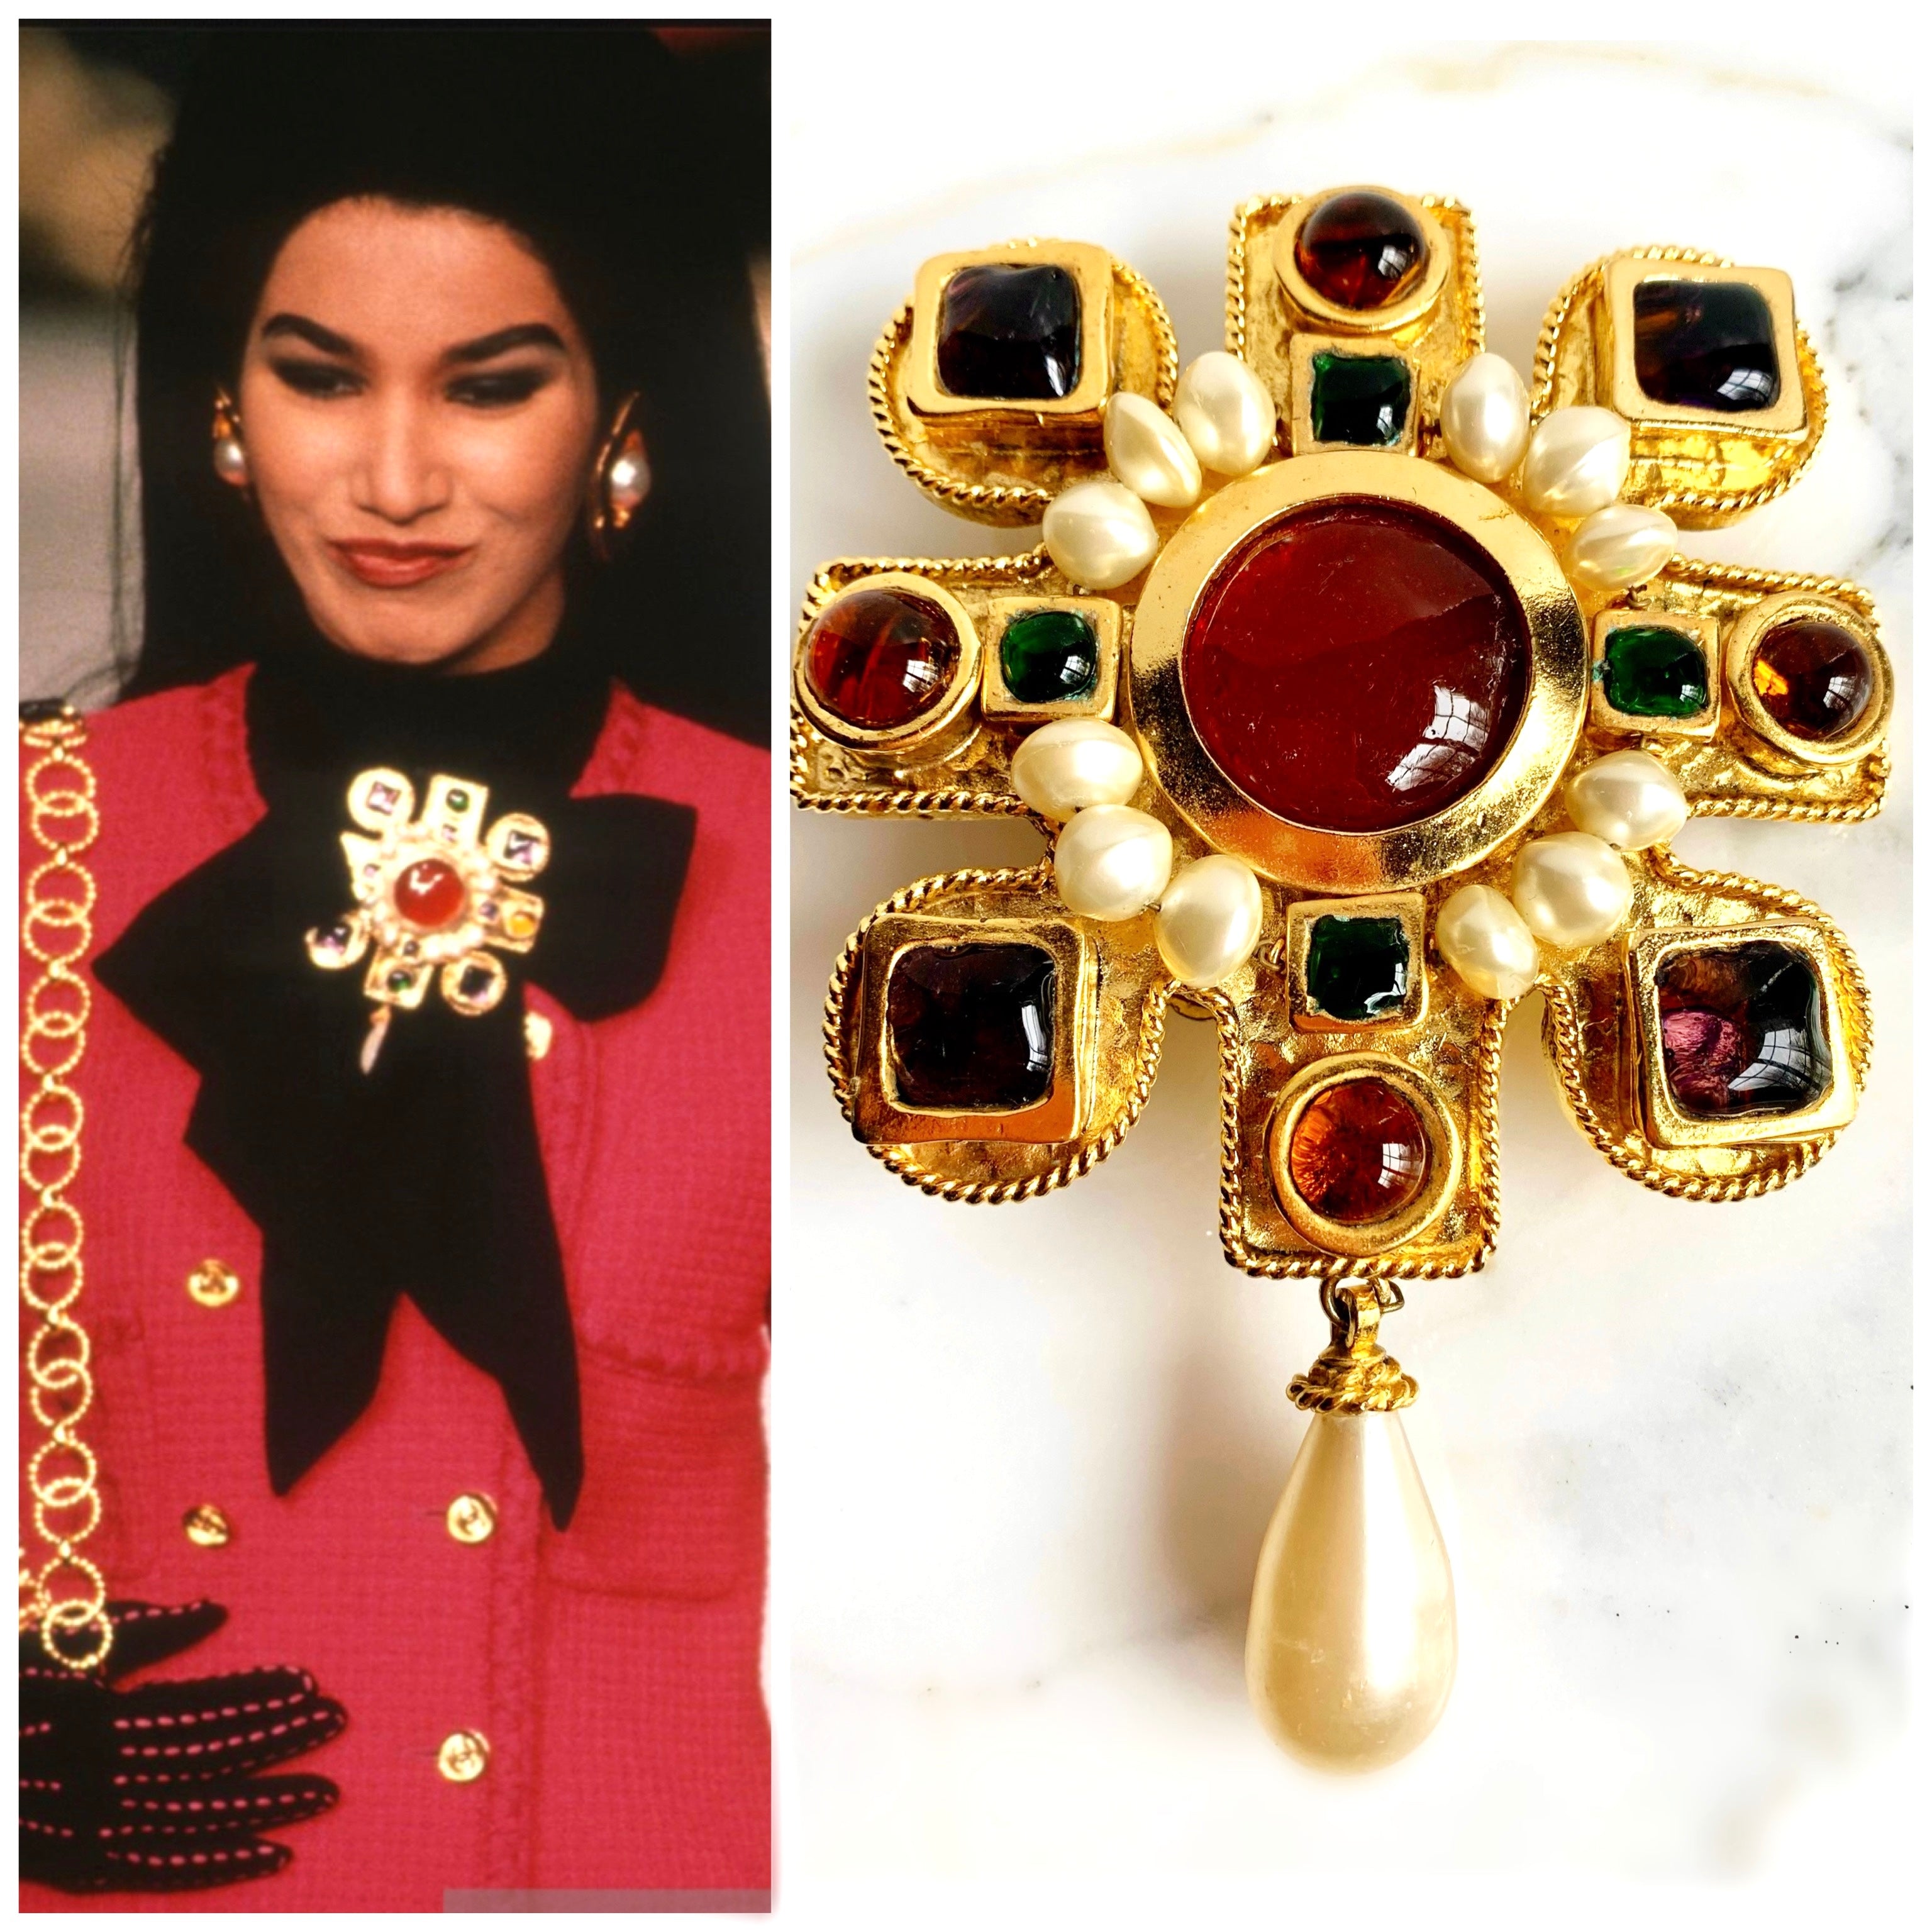 Chanel: A Gripoix Necklace with Byzantine Style Cross Pendant